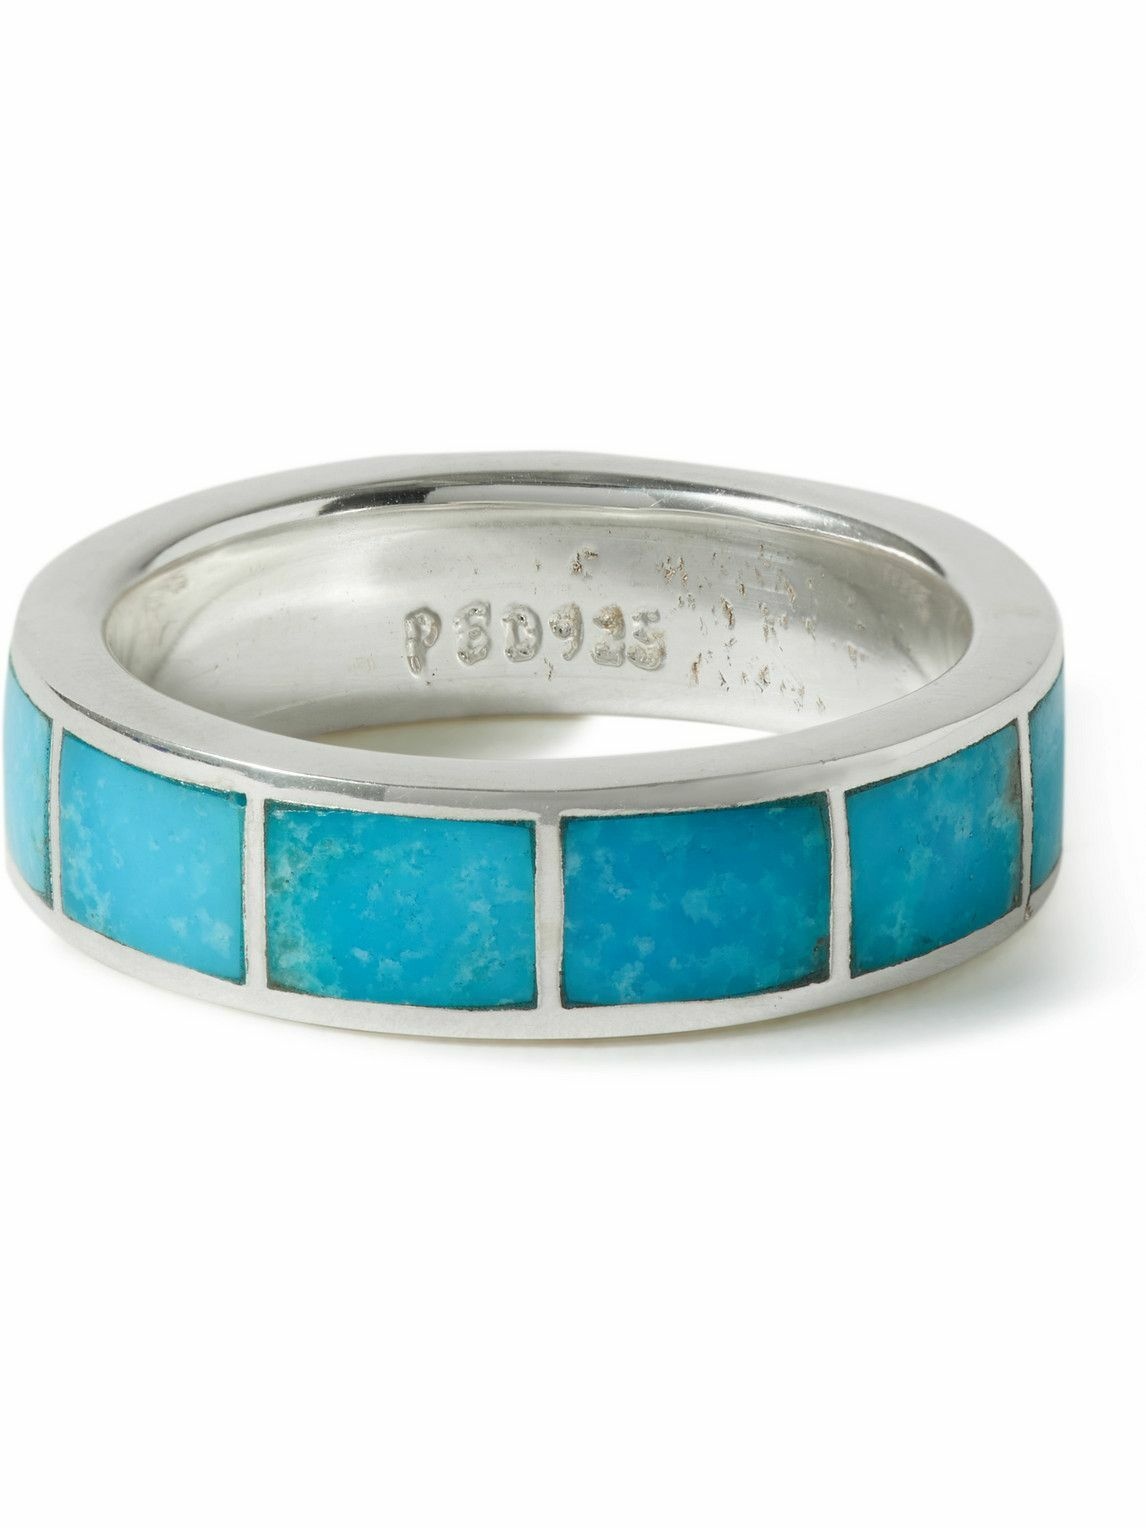 Photo: Peyote Bird - Eternite Silver and Turquoise Ring - Silver